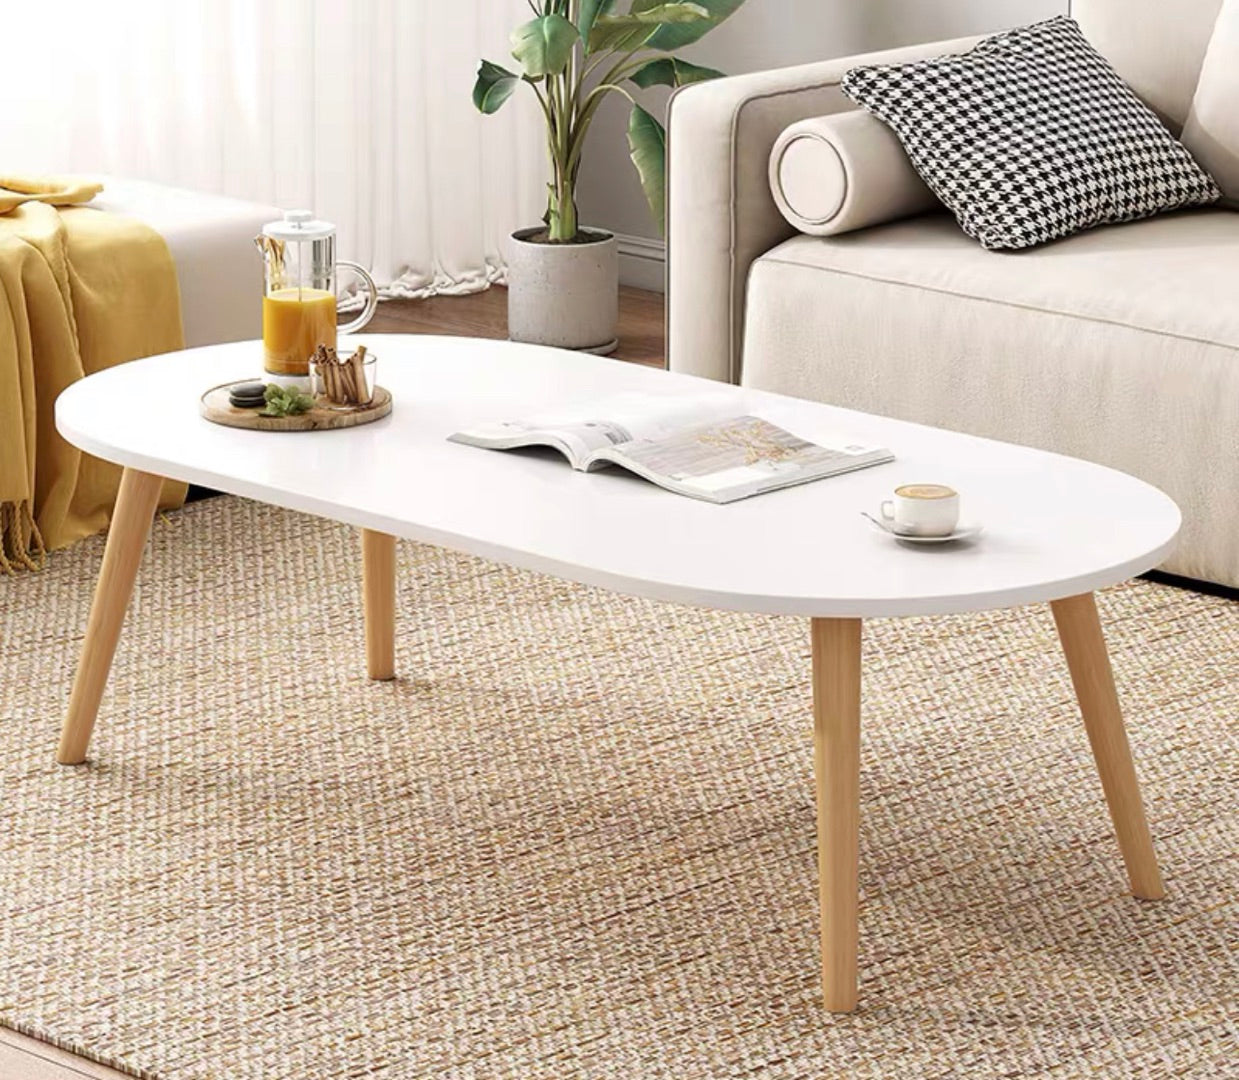 Rectangular Coffee Table with Modern Style Wood in White/wood Color